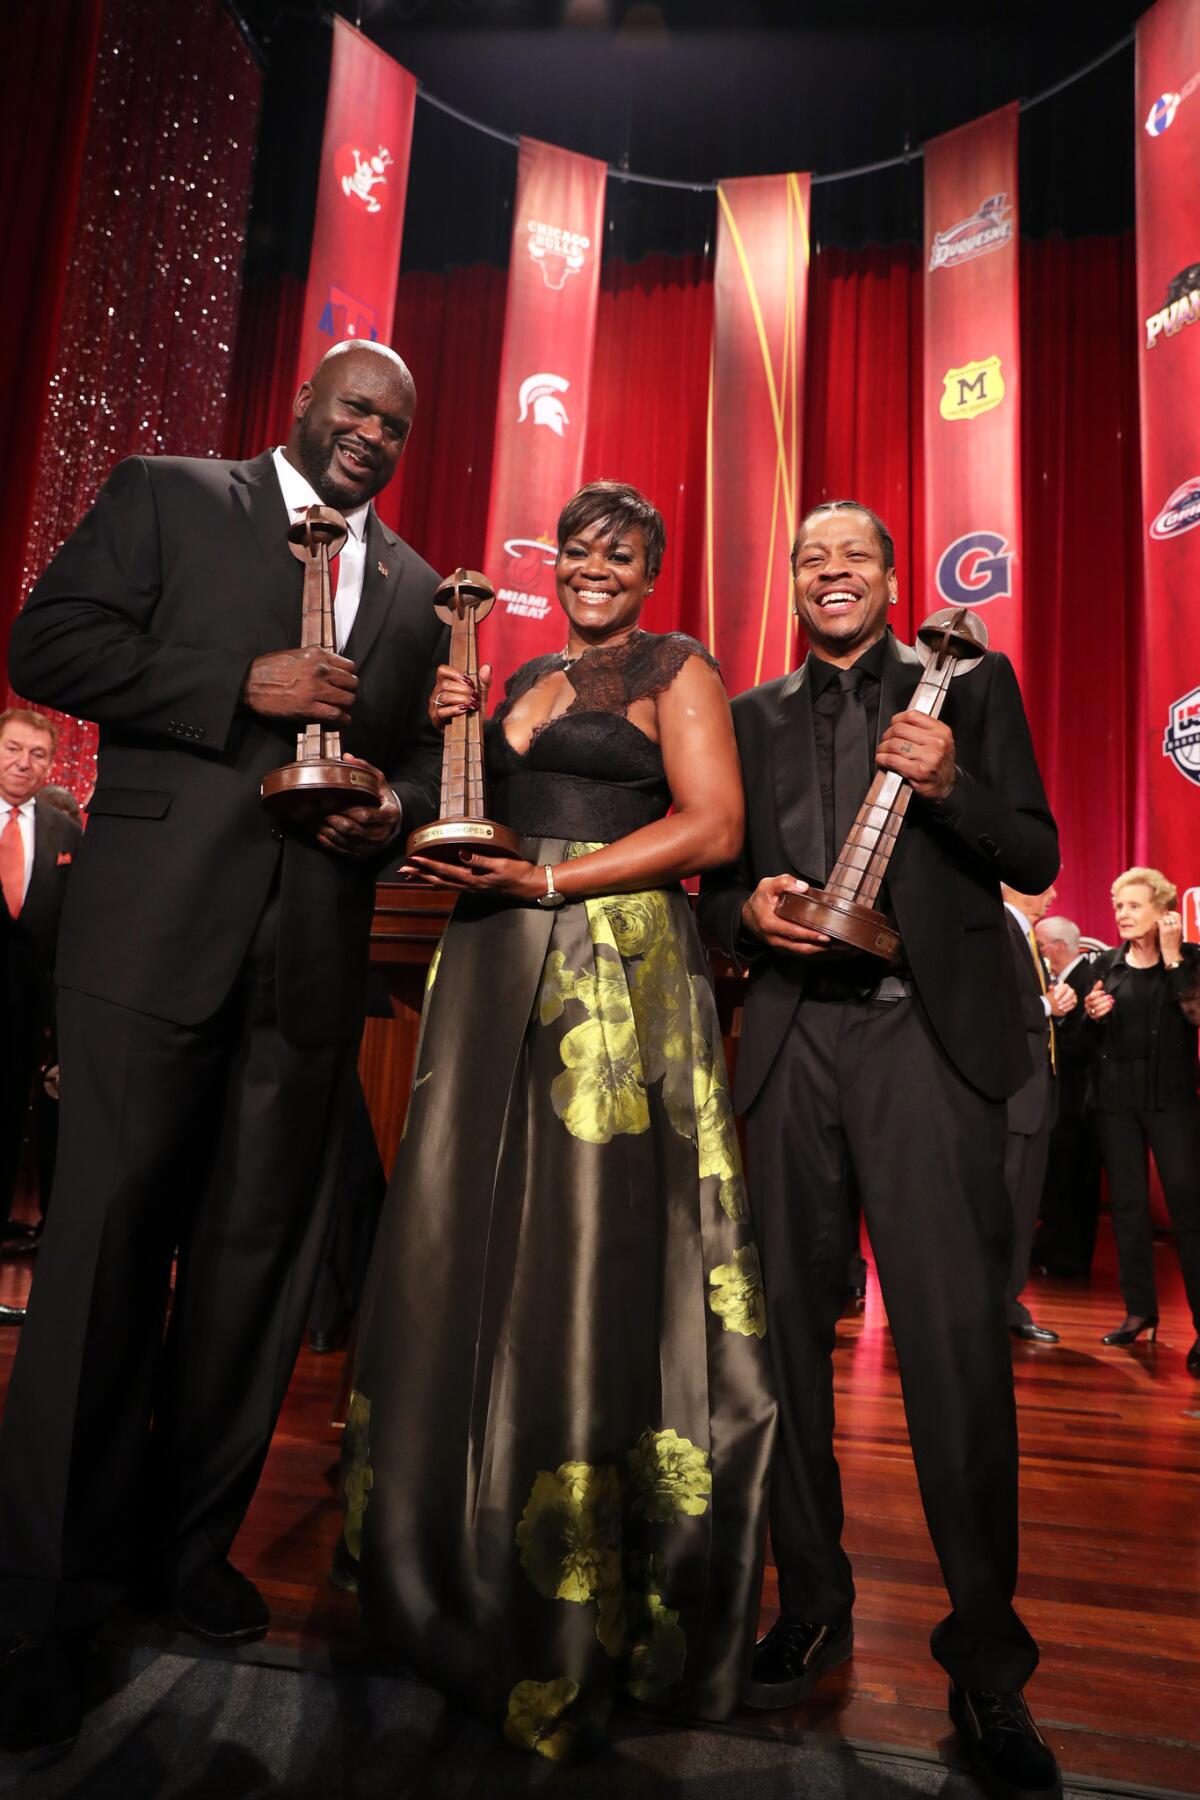 Basketball Hall of Fame inductees Shaquille O'Neal, left, Sheryl Swoopes and Allen Iverson appear onstage during the Basketball Hall of Fame Enshrinement Ceremony at Springfield Symphony Hall in Springfield, Mass., on Sept. 9, 2016.